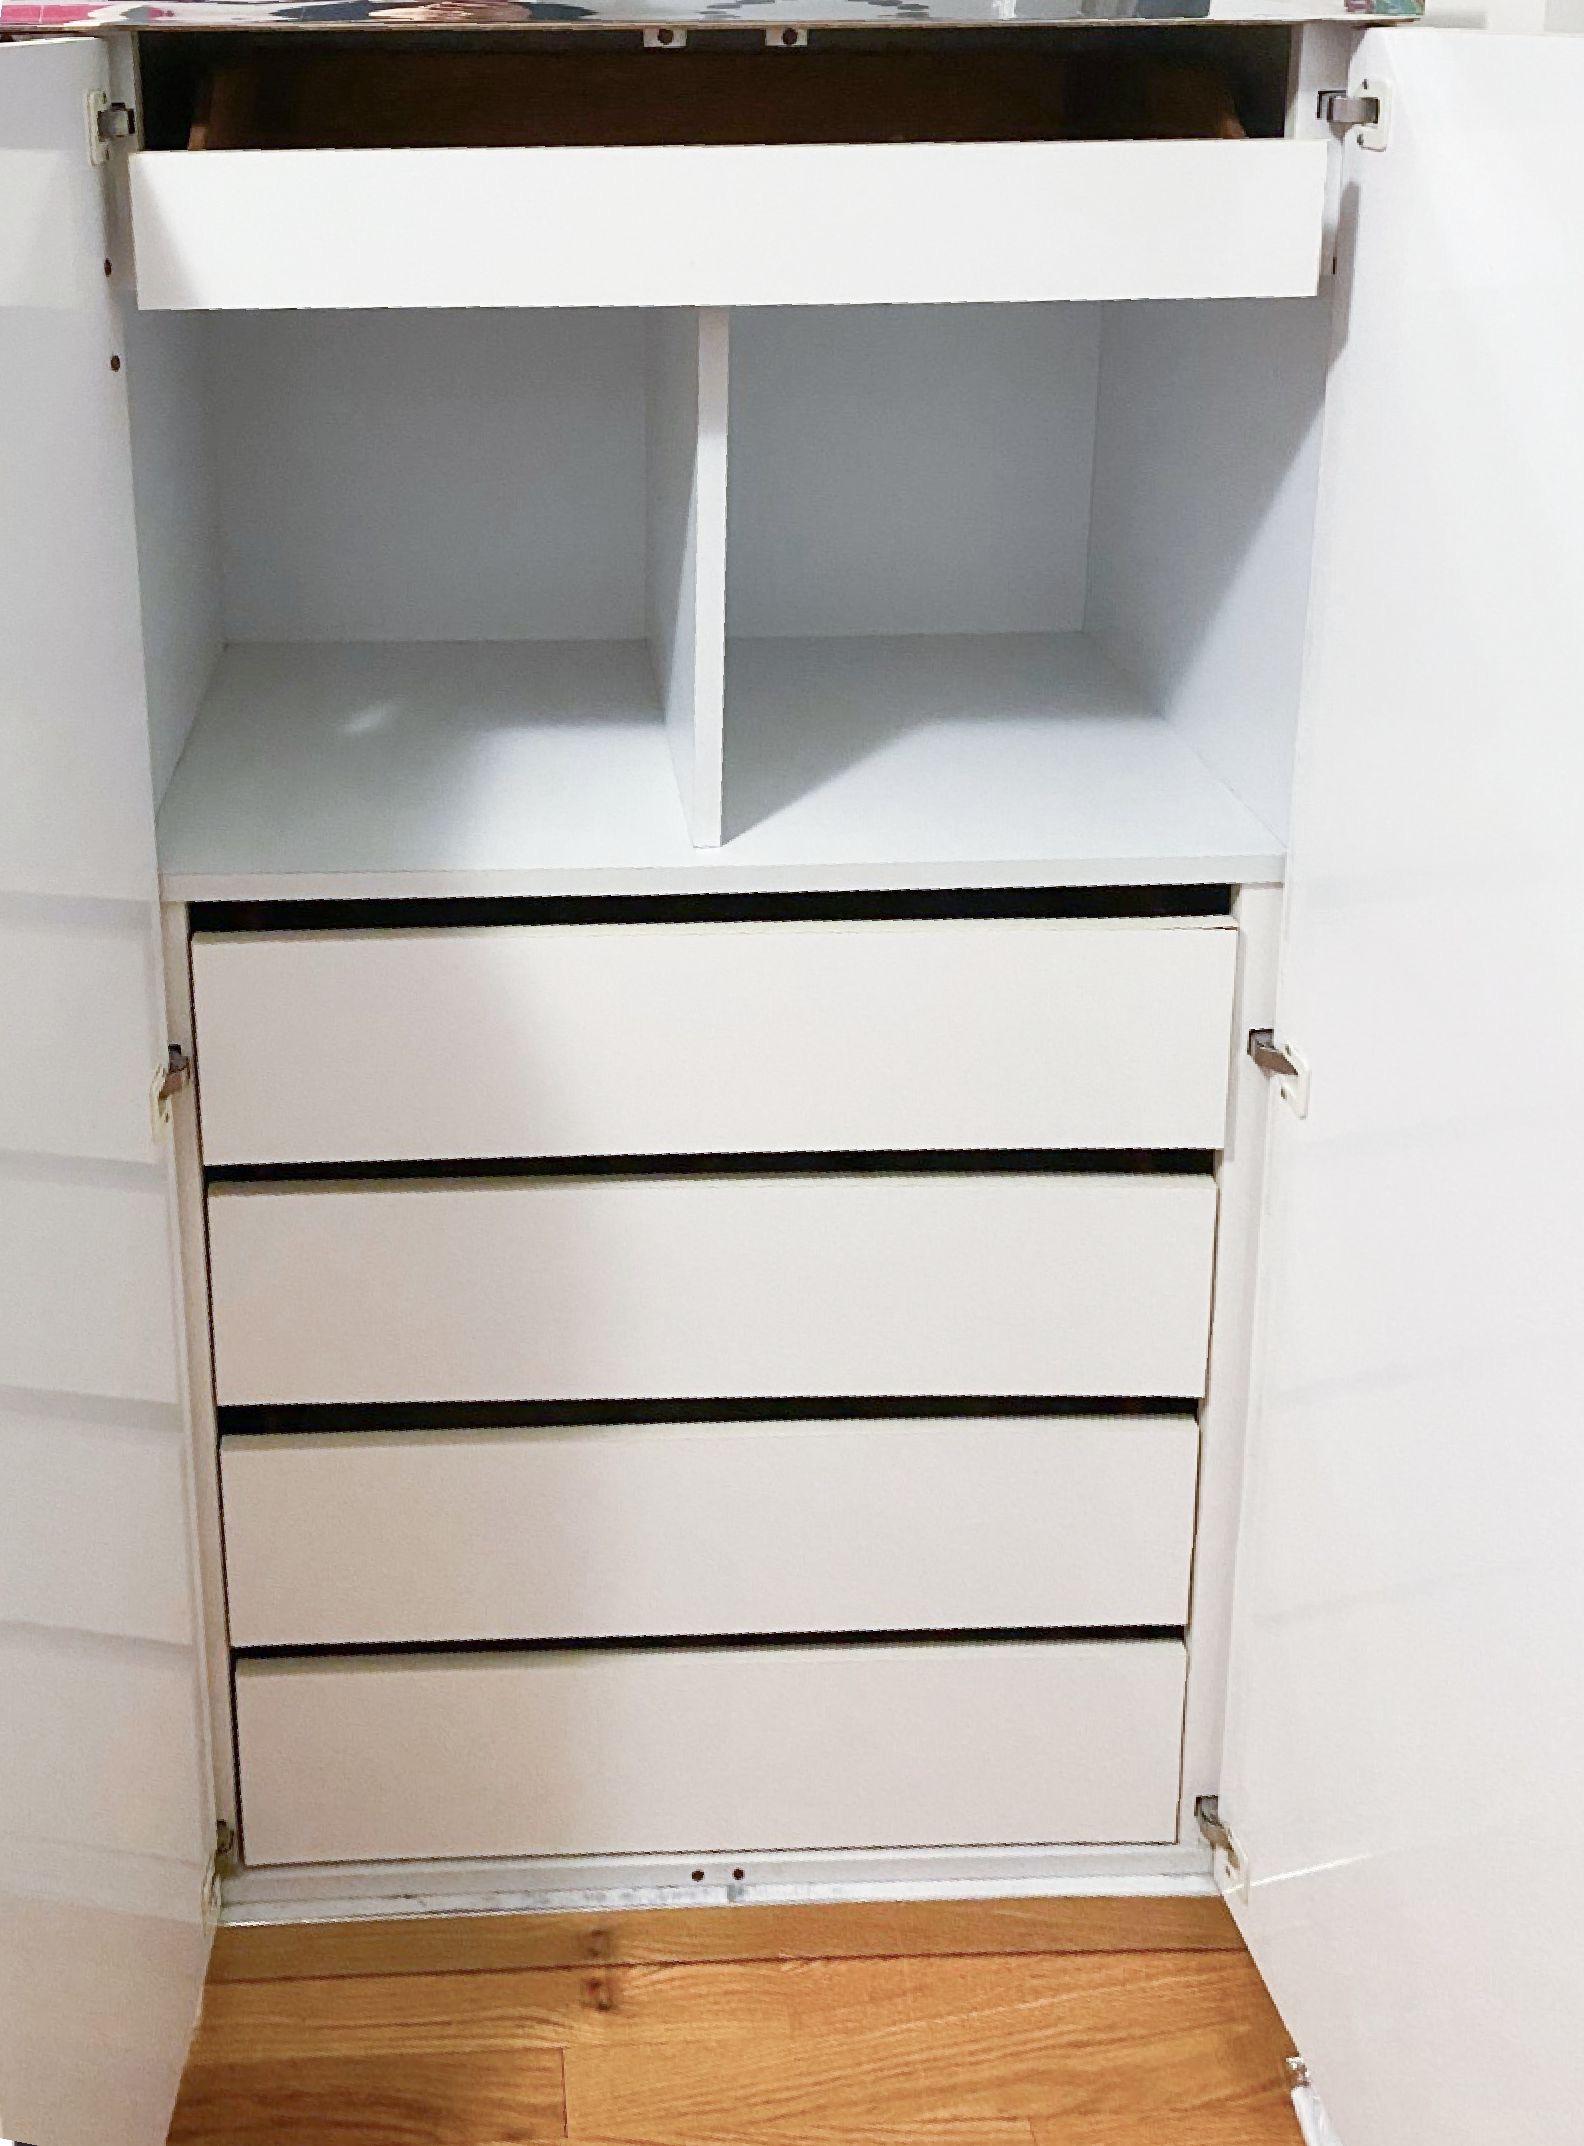 Pierre Cardin white and chrome three-section cabinet, chest of drawers, Armoire. Rare three-door setup with hanging rod and drawers, a few adjustable shelves.

Measures: Width 46.5 inches, height 56.5 inches, depth 19 inches.